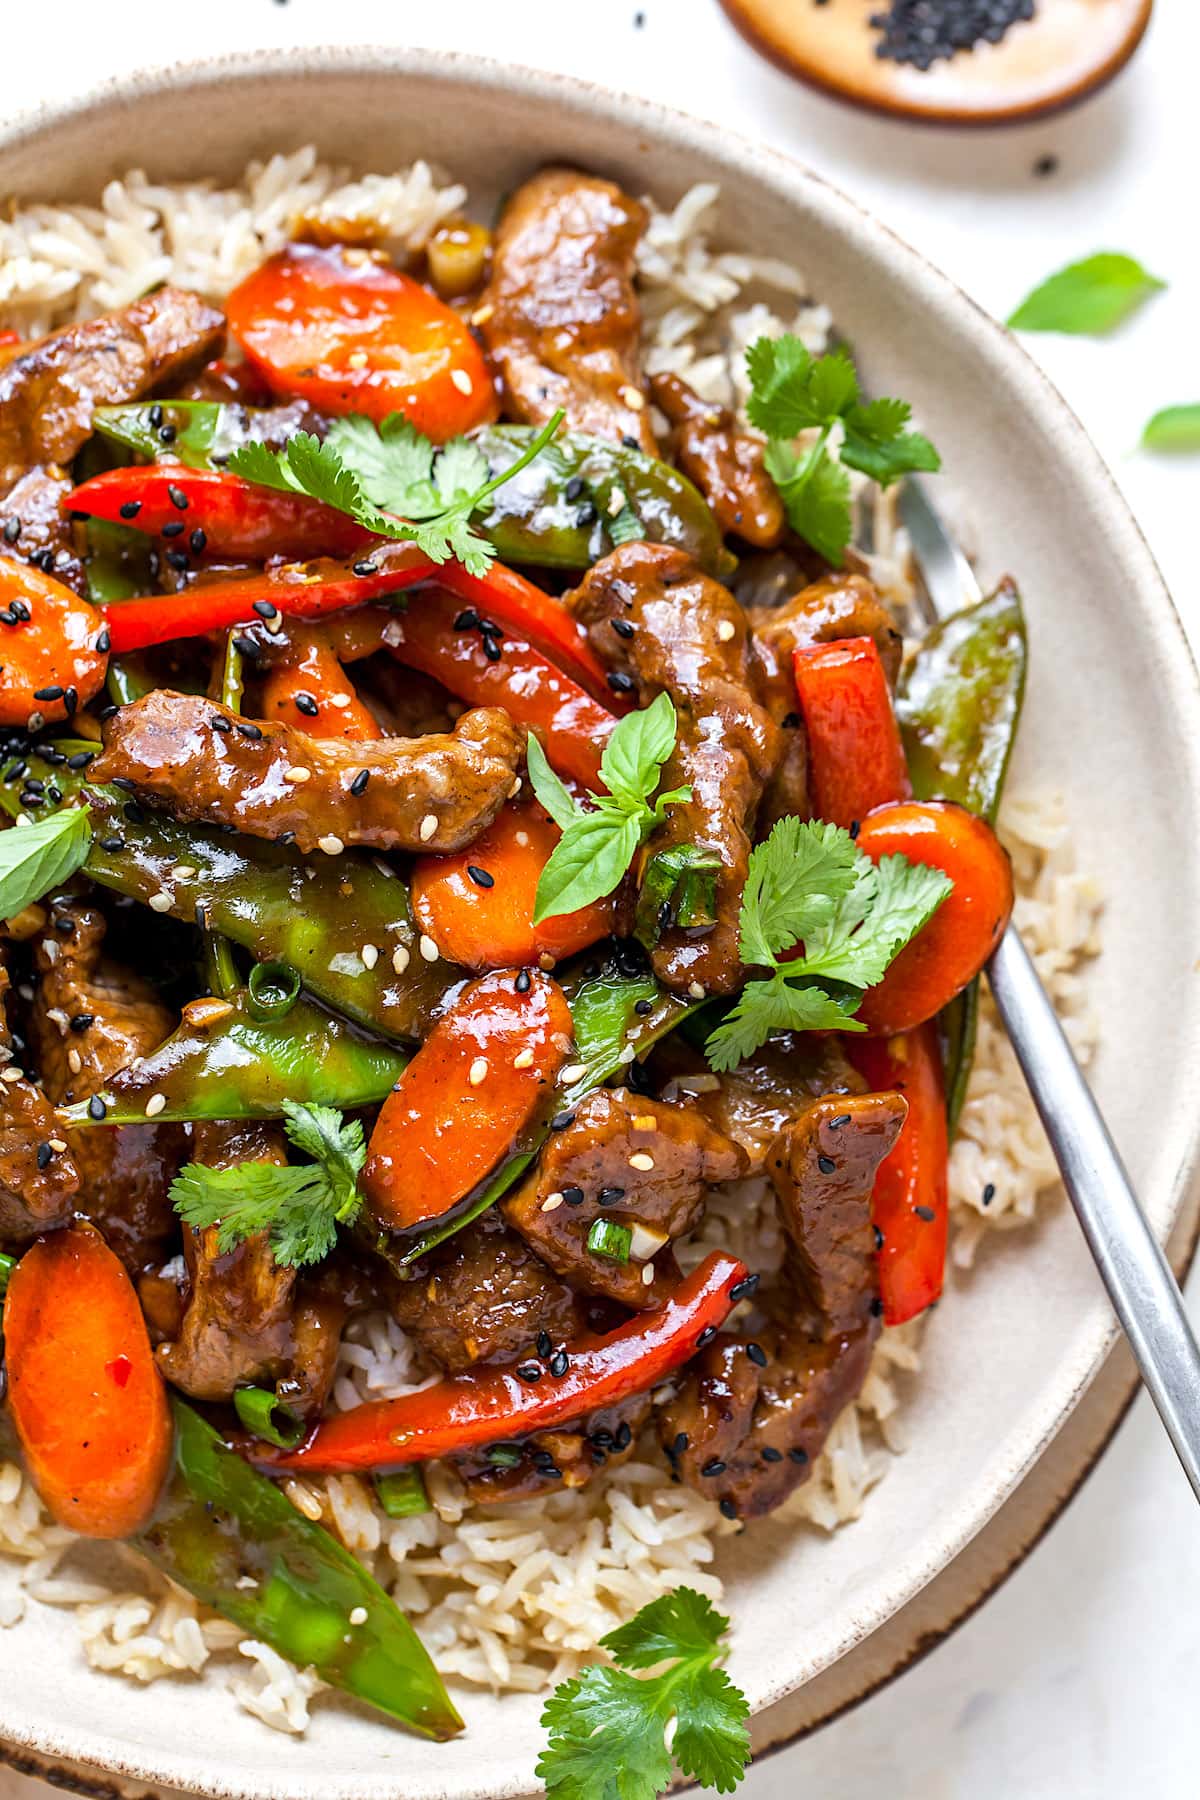 how long to cook beef stir fry meat